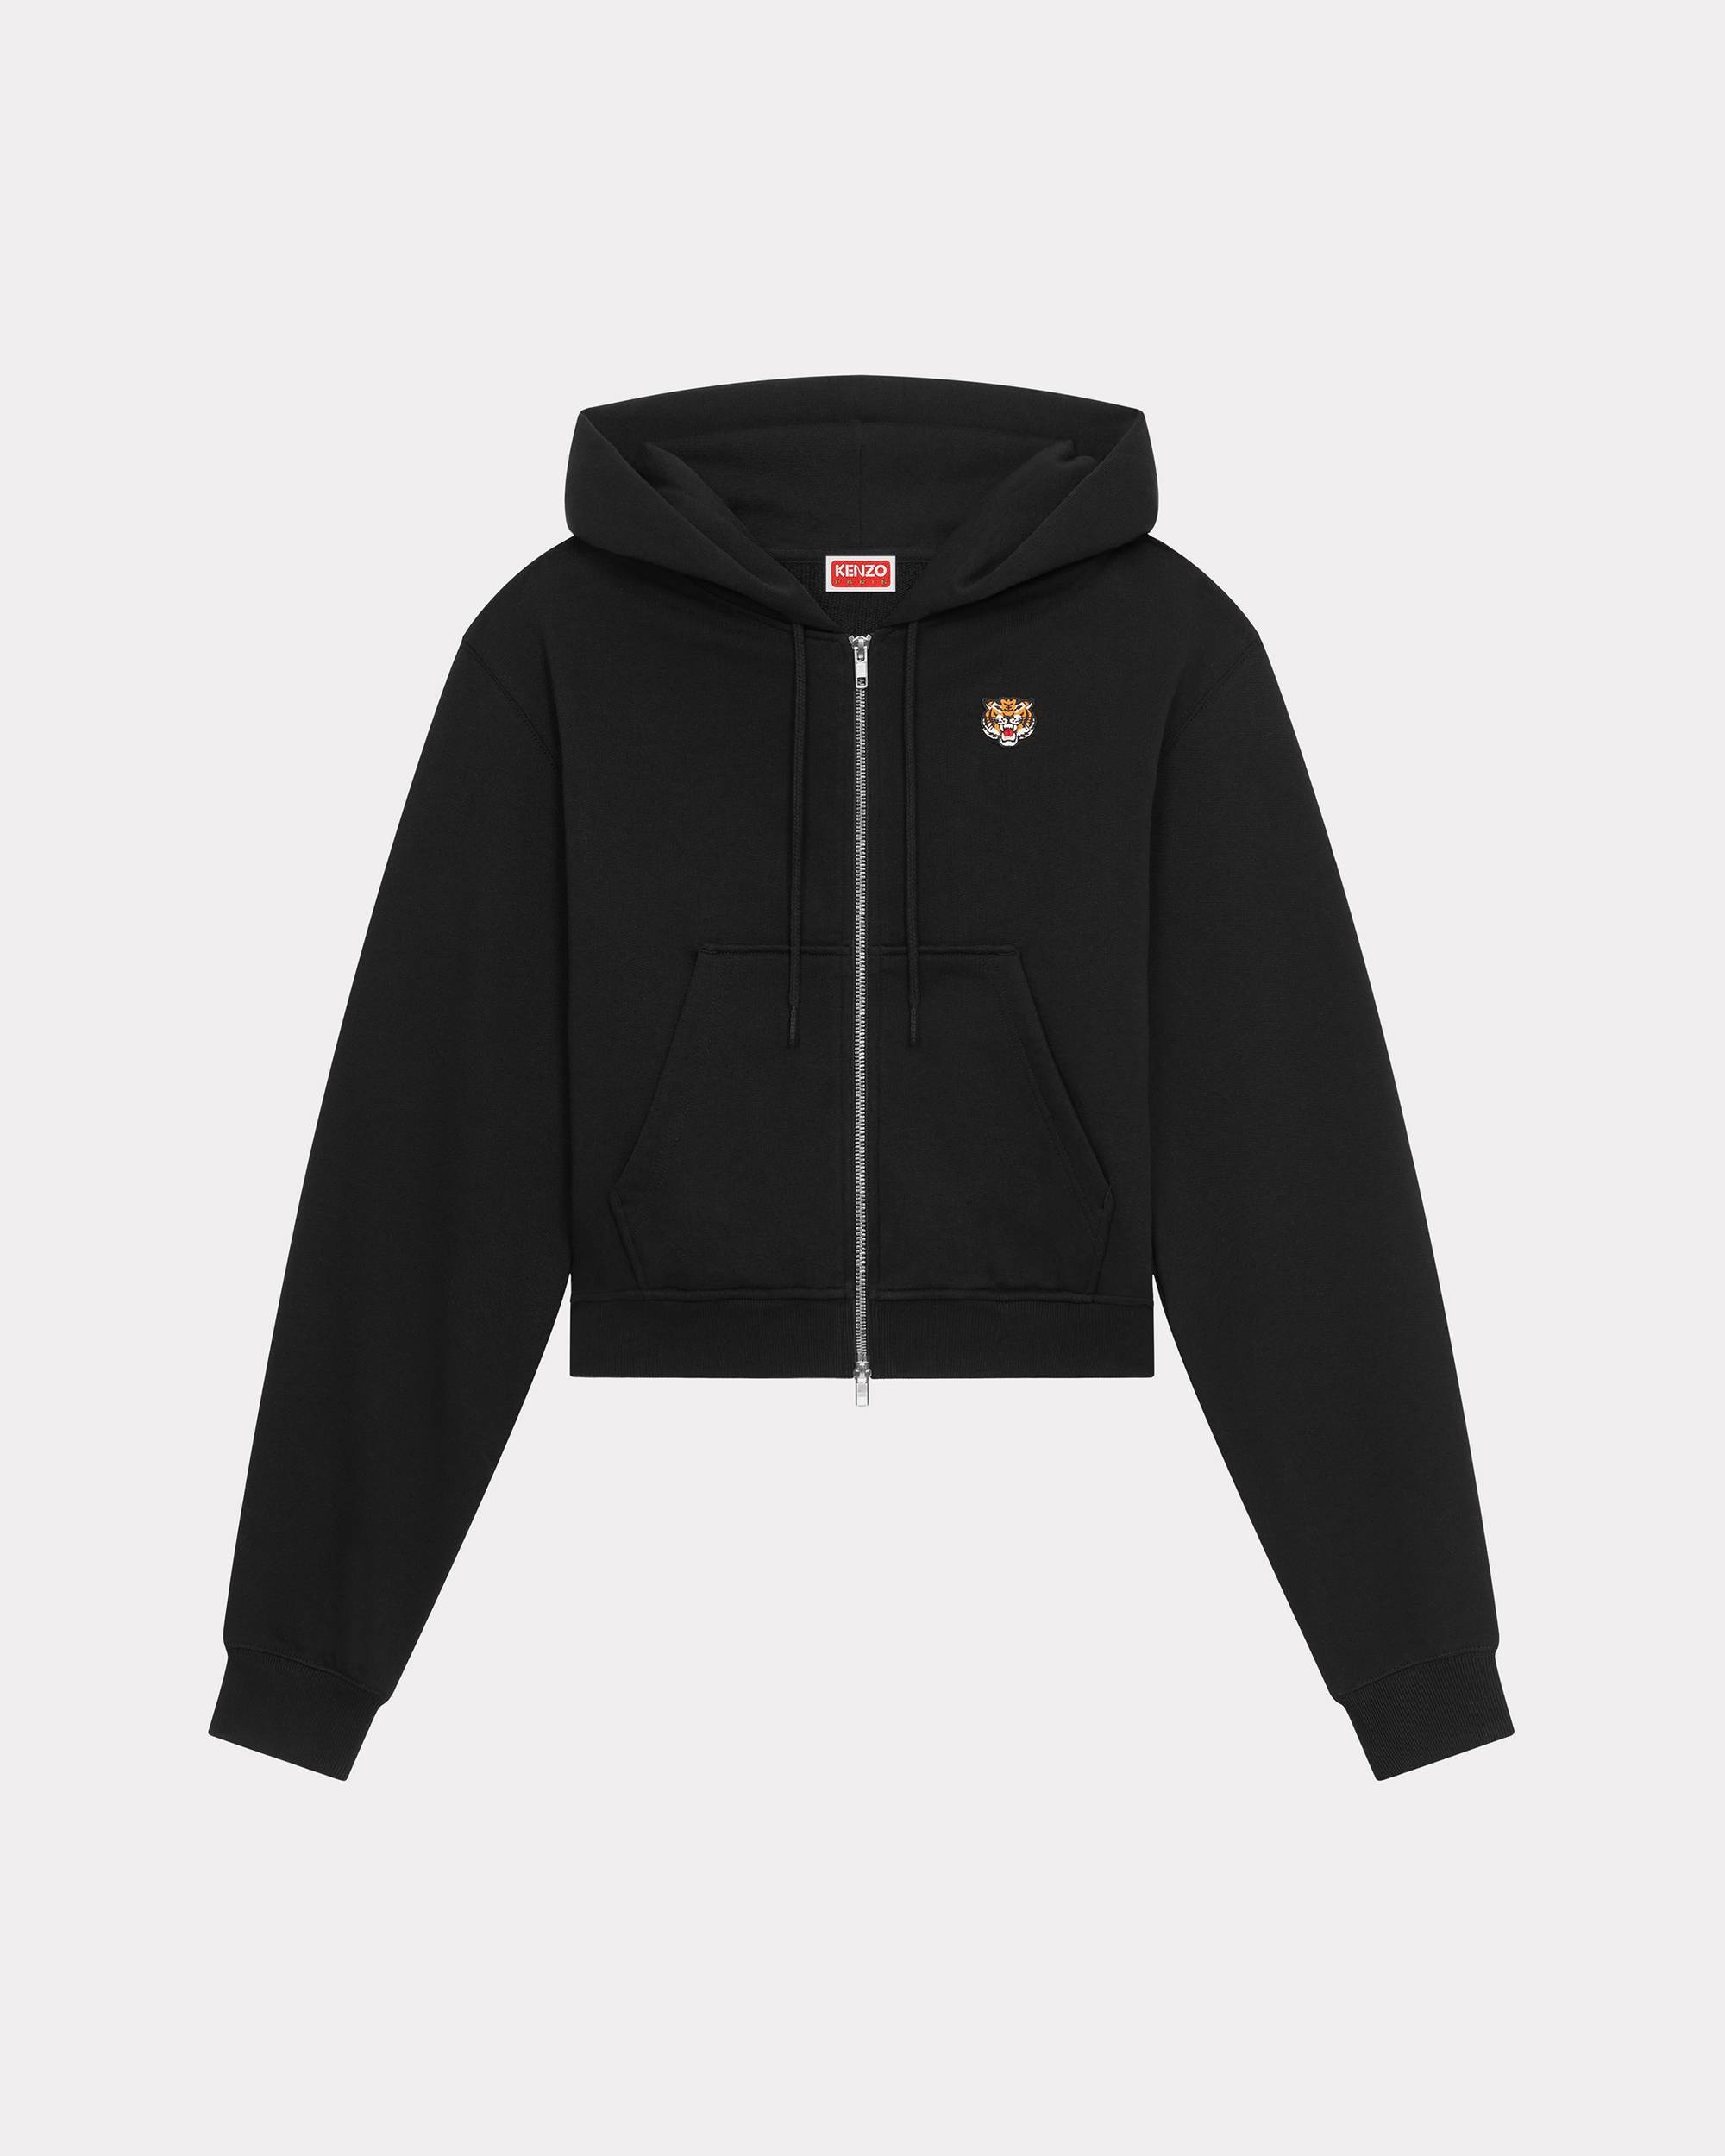 'Lucky Tiger Crest' embroidered zip-up hoodie - 1